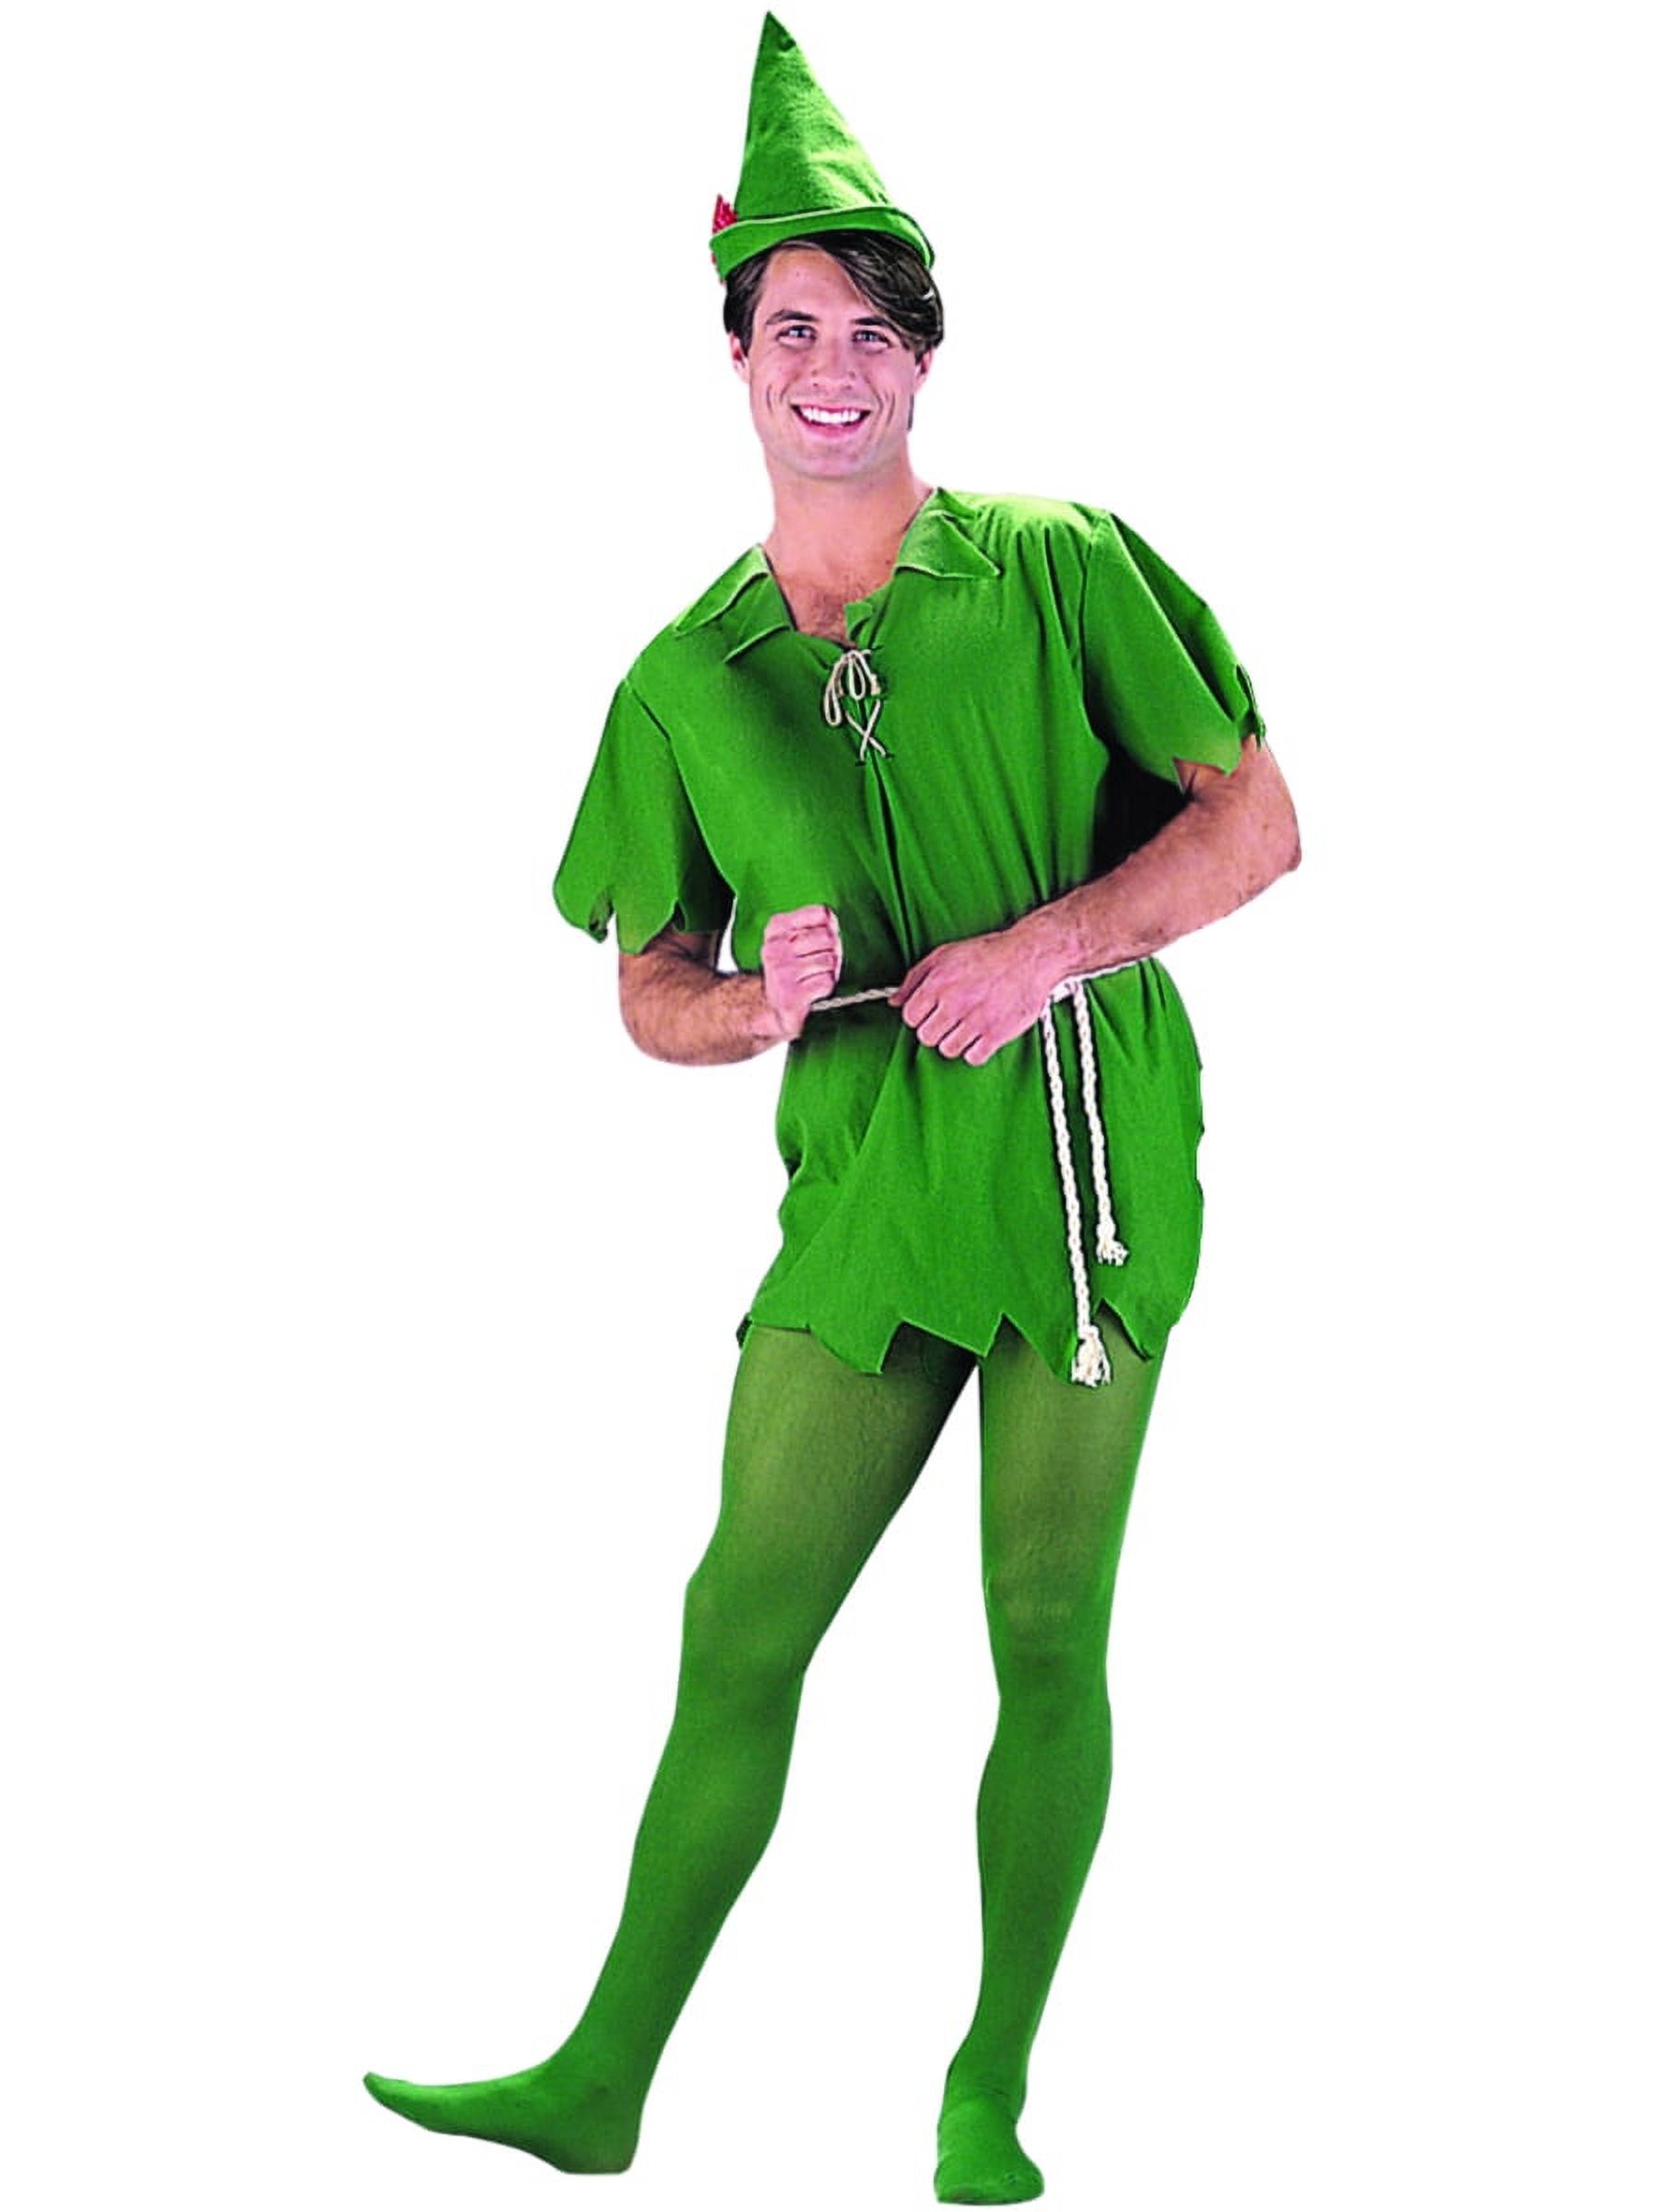 Peter Pan Adult Costume (X-Large 40-42) - image 2 of 2